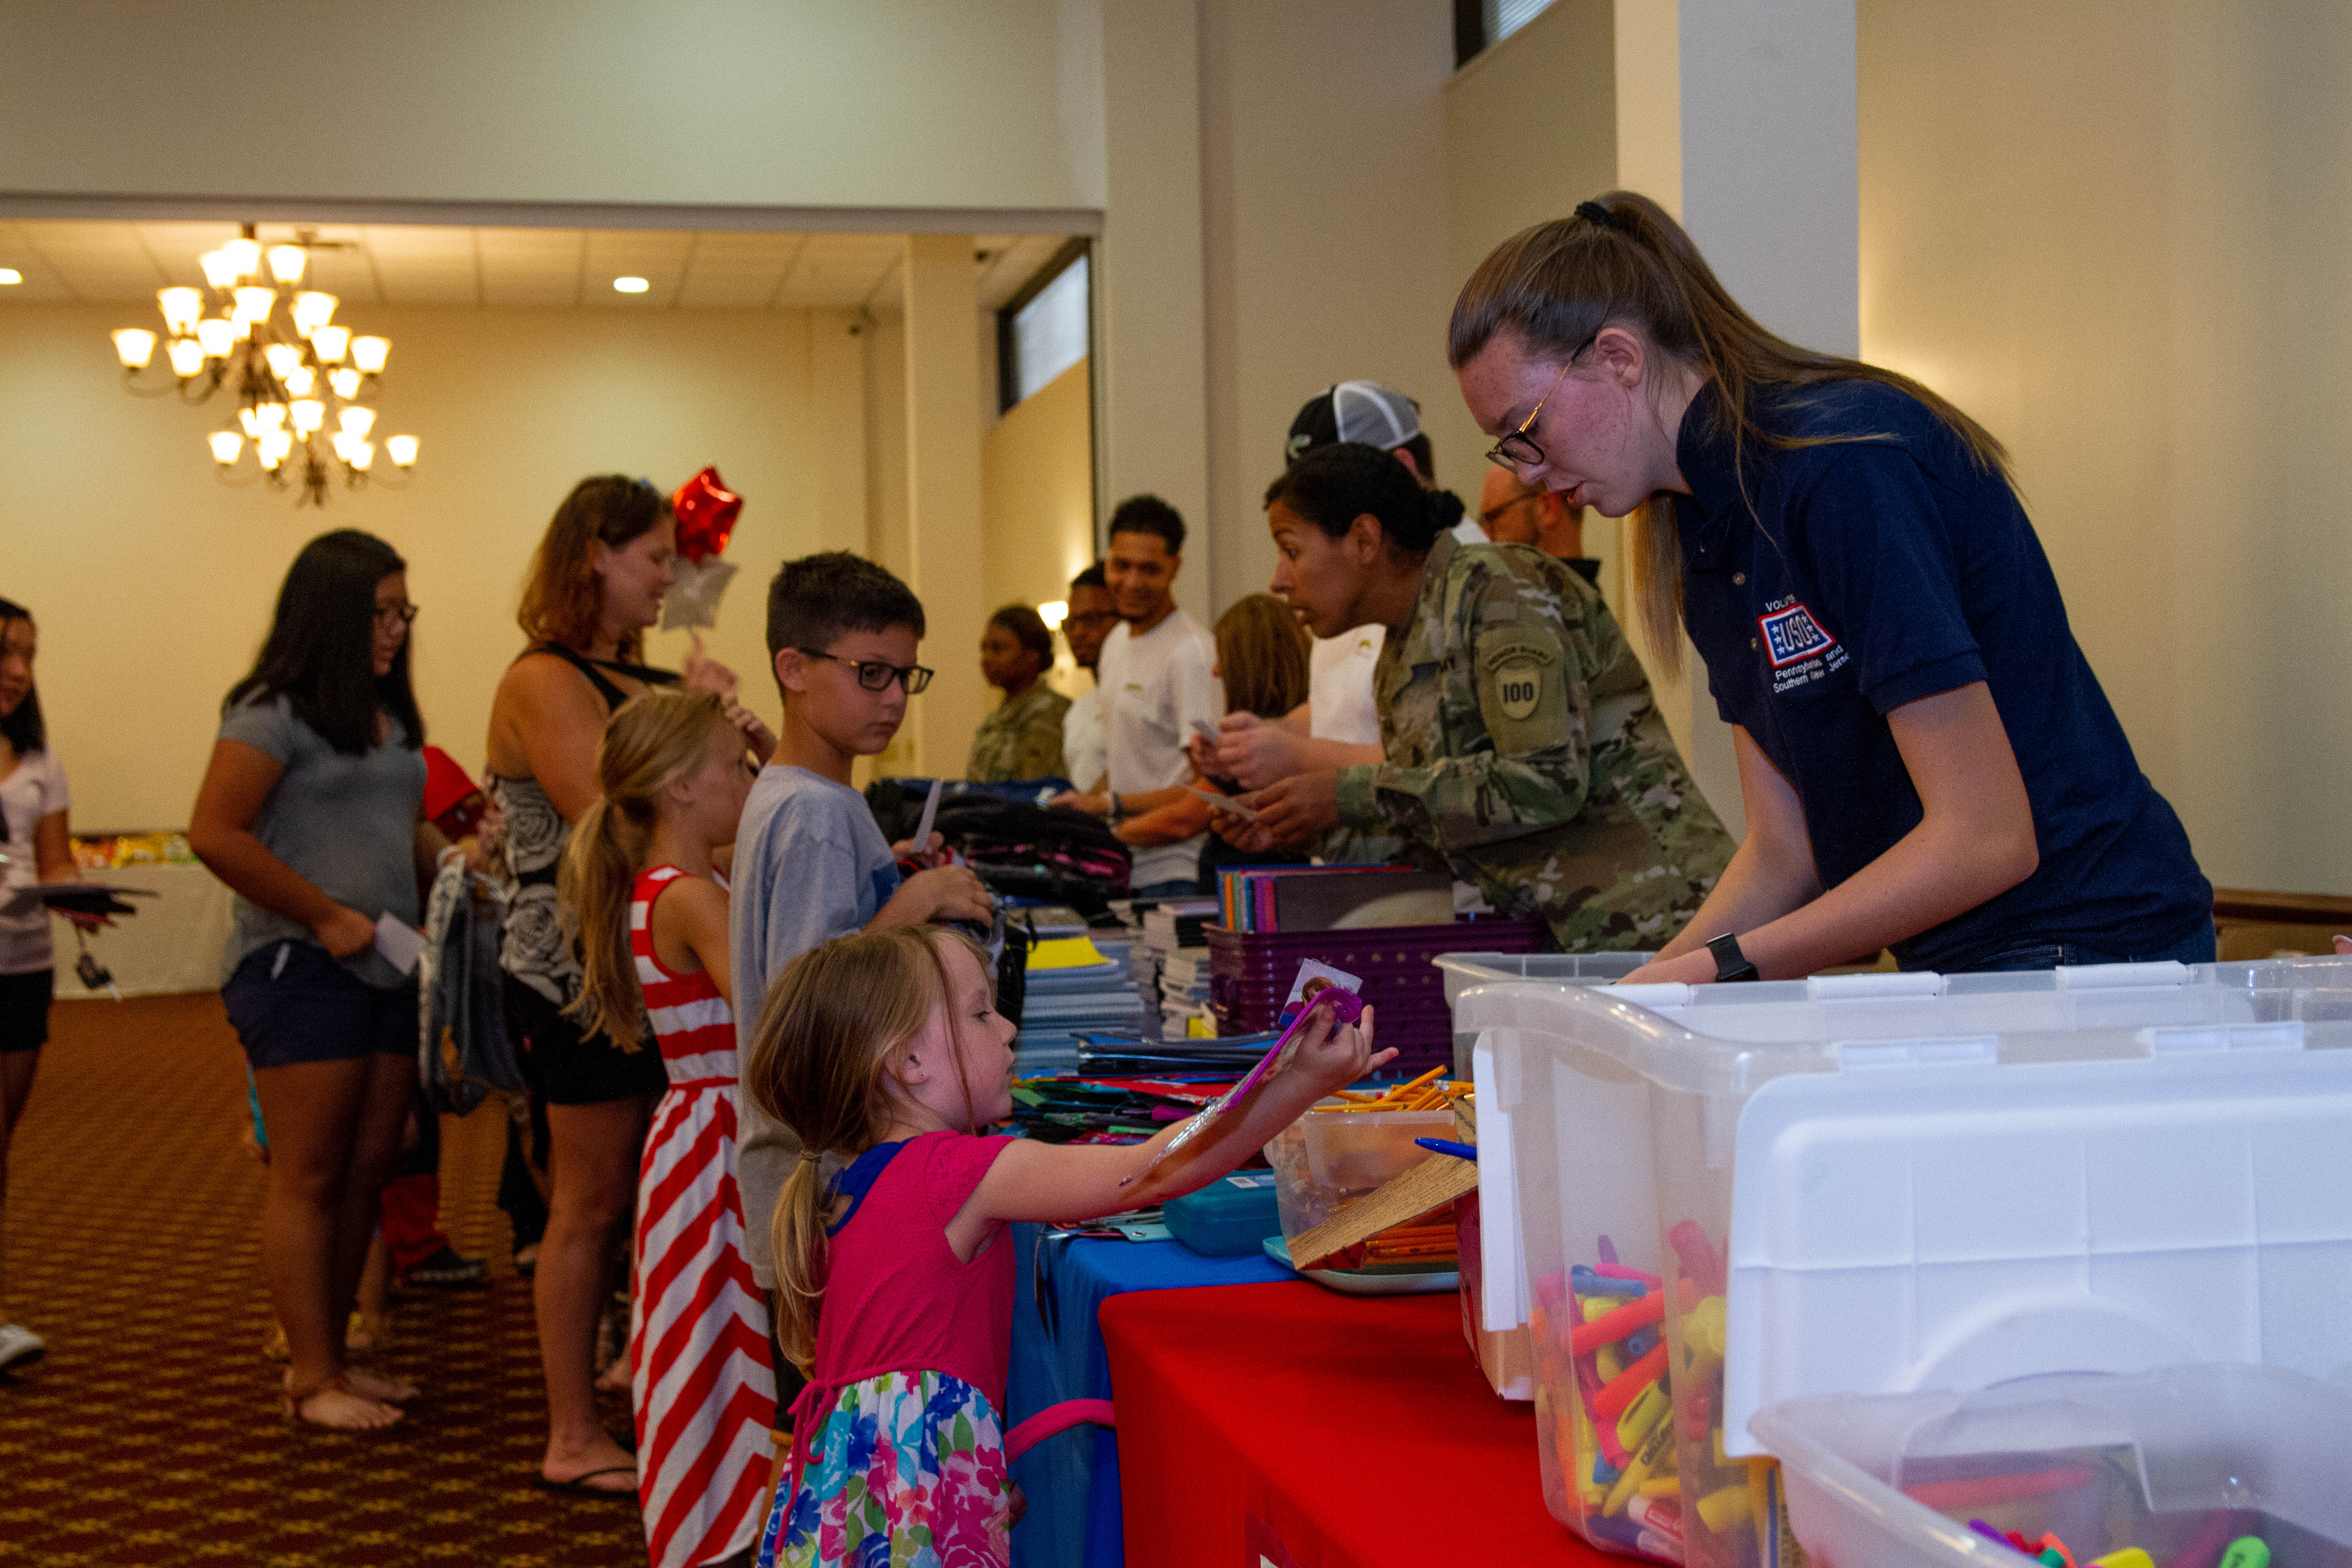 Freedom Mortgage has teamed up with the United Service Organizations (USO) to provide the children of military families, grades K-8, with free backpacks that hold donated school supplies, including pencils, pens, notebooks, folders, glue, crayons and more